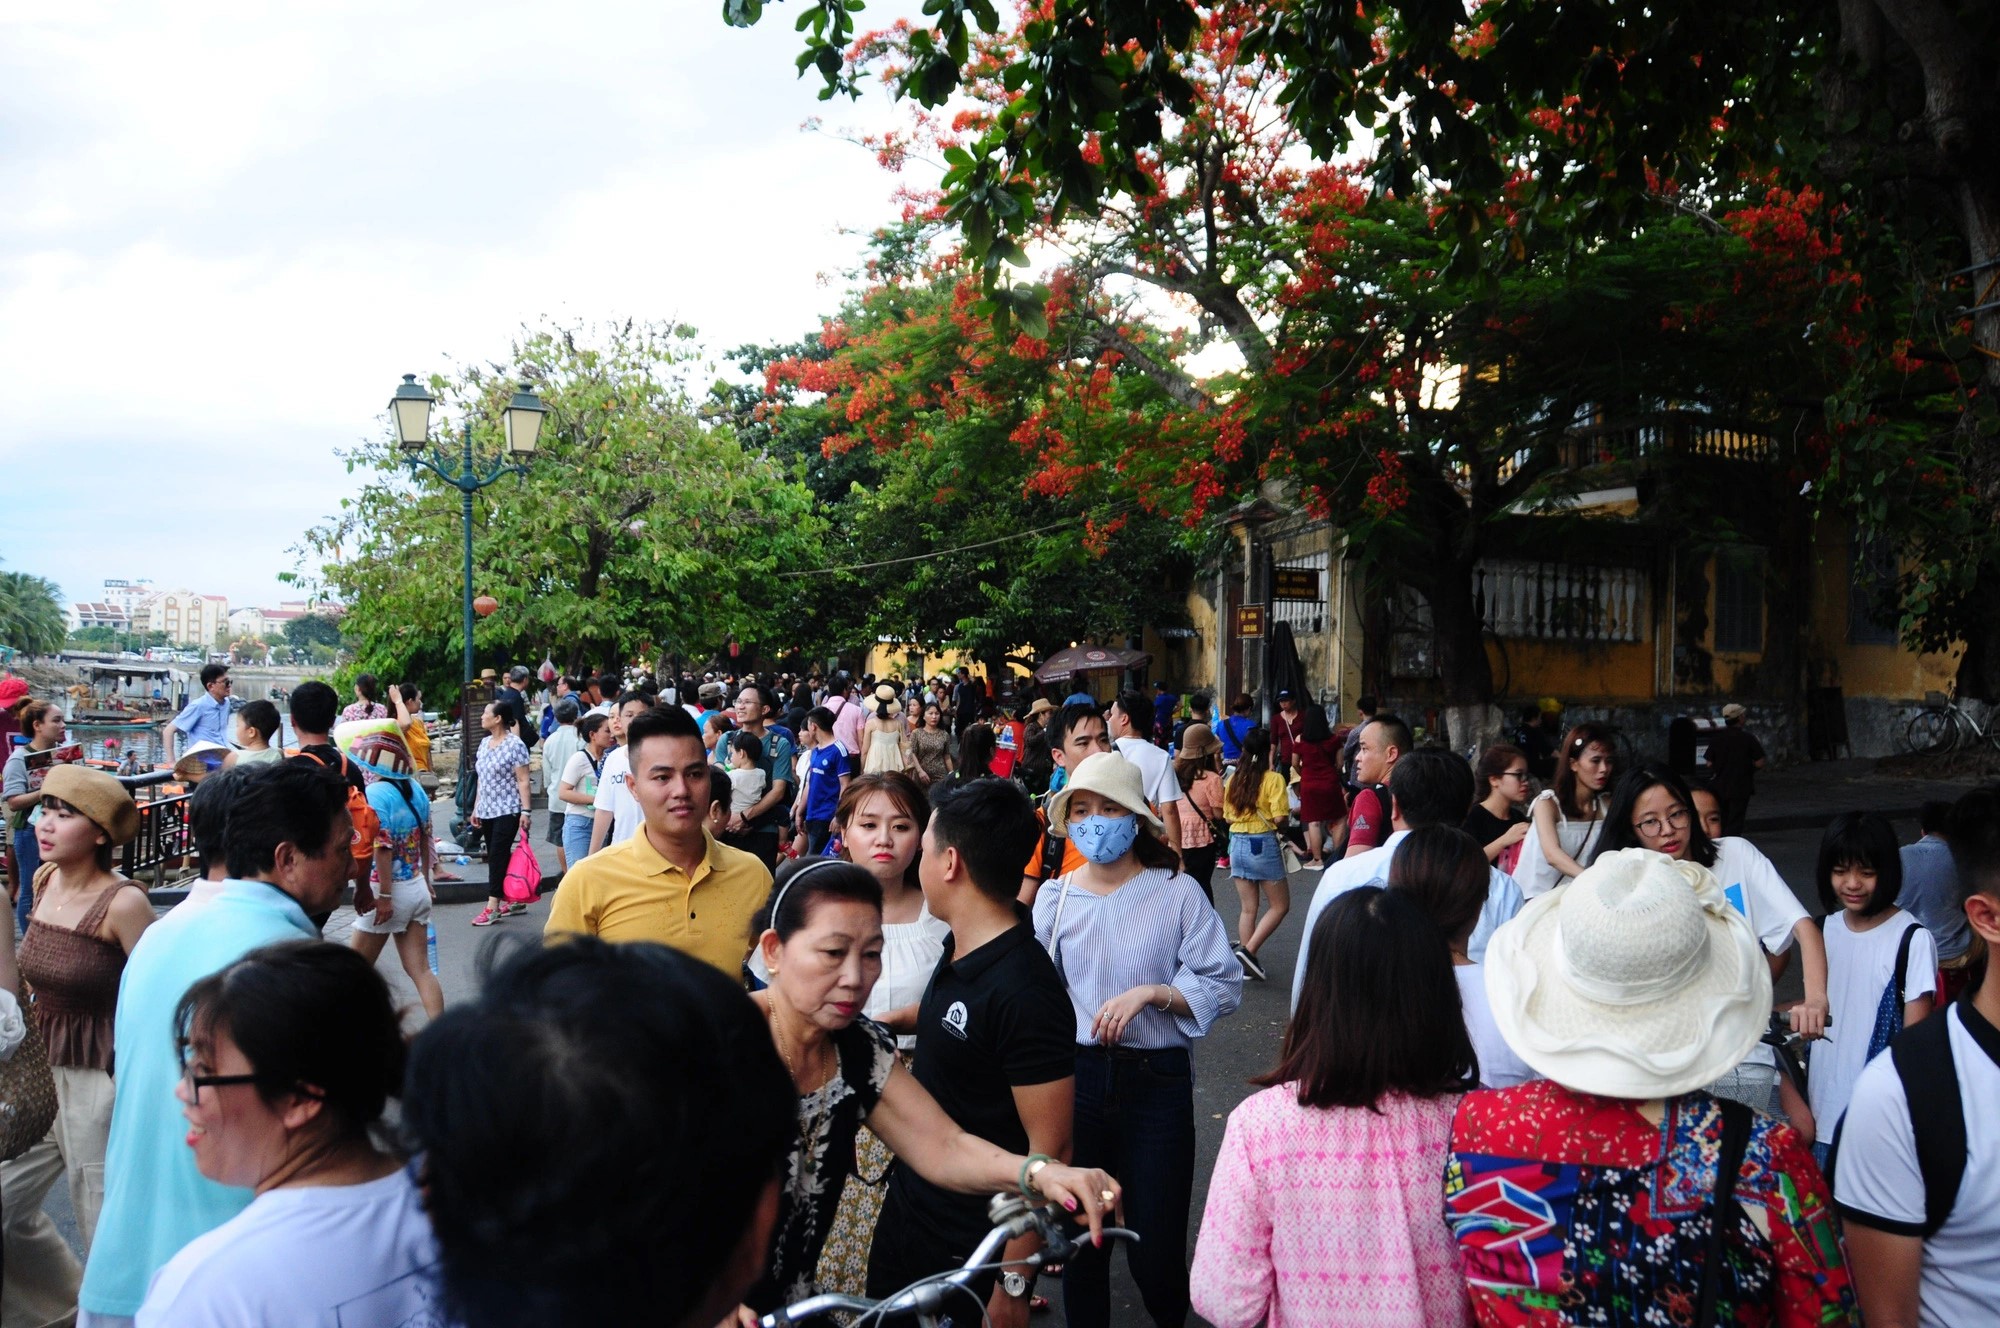 Although tourists flood Hoi An, they do not spend much money since the local tourism industry still lacks the facilities and services they need. Photo: B.D. / Tuoi Tre